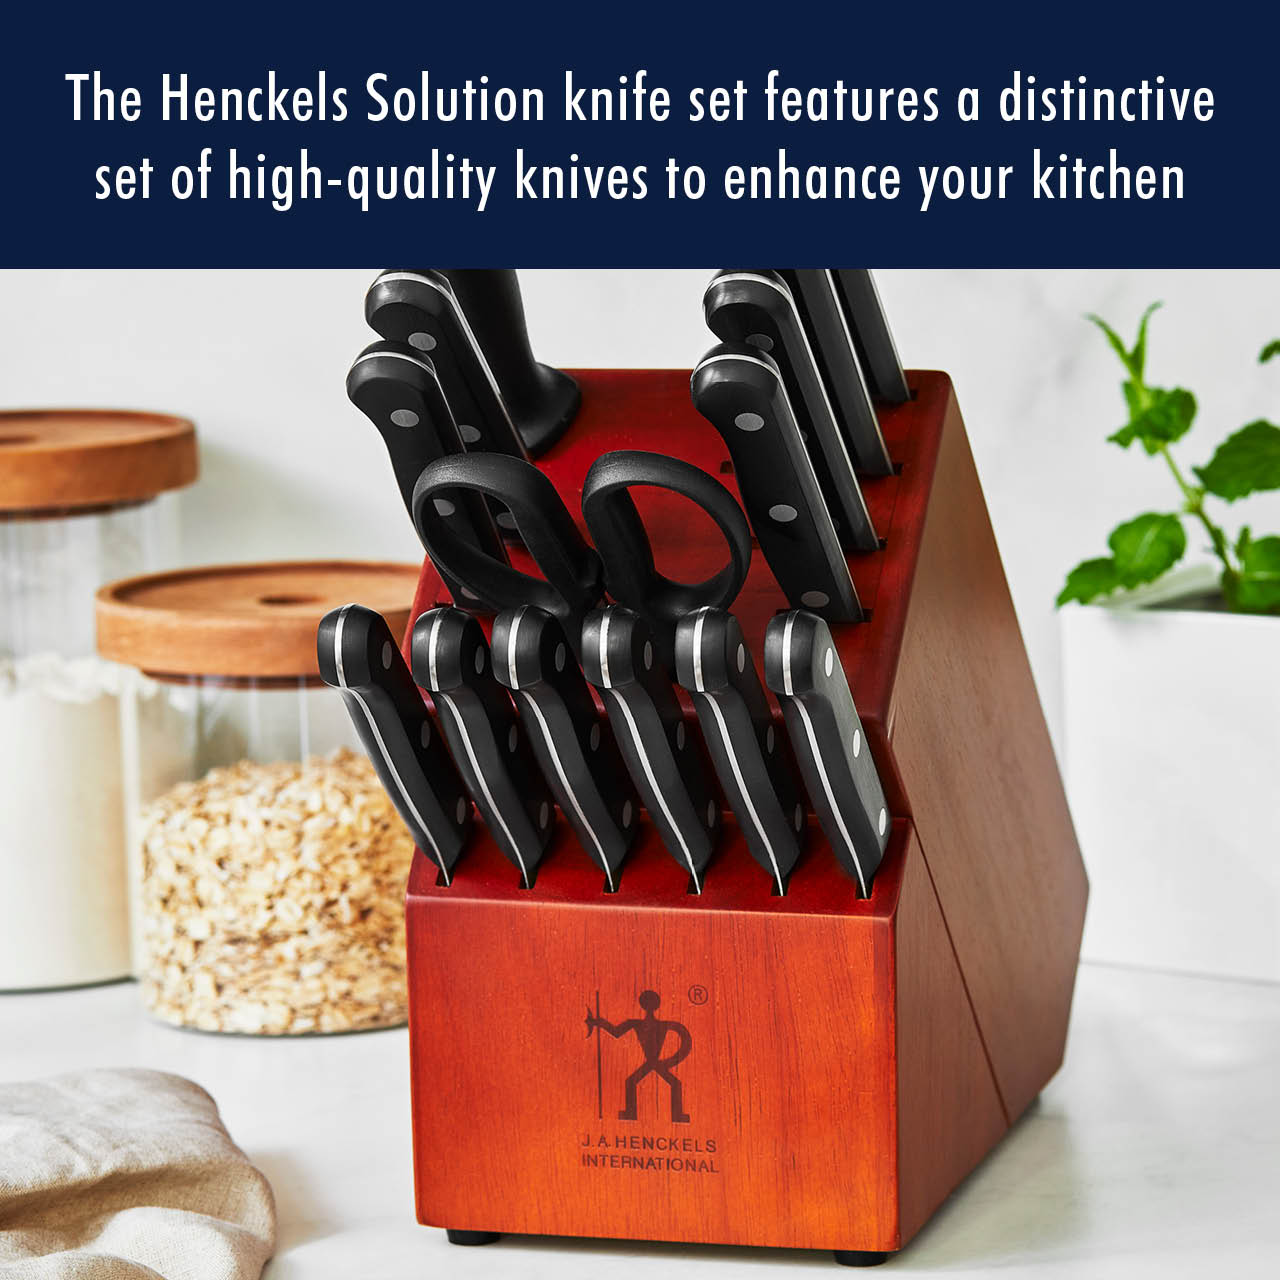 Henckels Solution 15-pc Kitchen Knife Set with Block, Chef Knife, Paring Knife, Utility Knife, Bread Knife, Steak Knife, Black, Stainless Steel - image 8 of 9